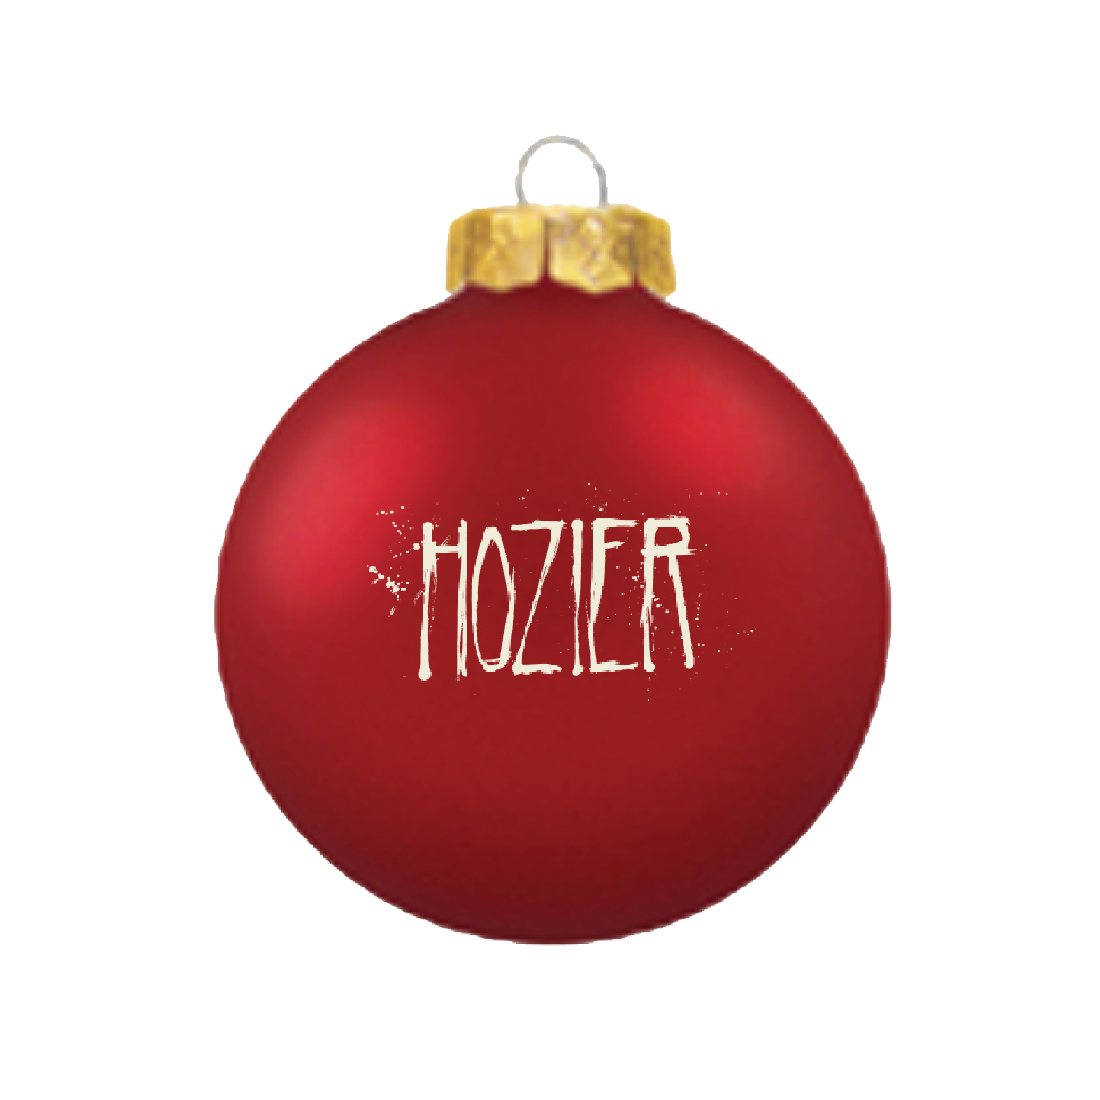 Hozier - Simple Living Things Ornament (Red)